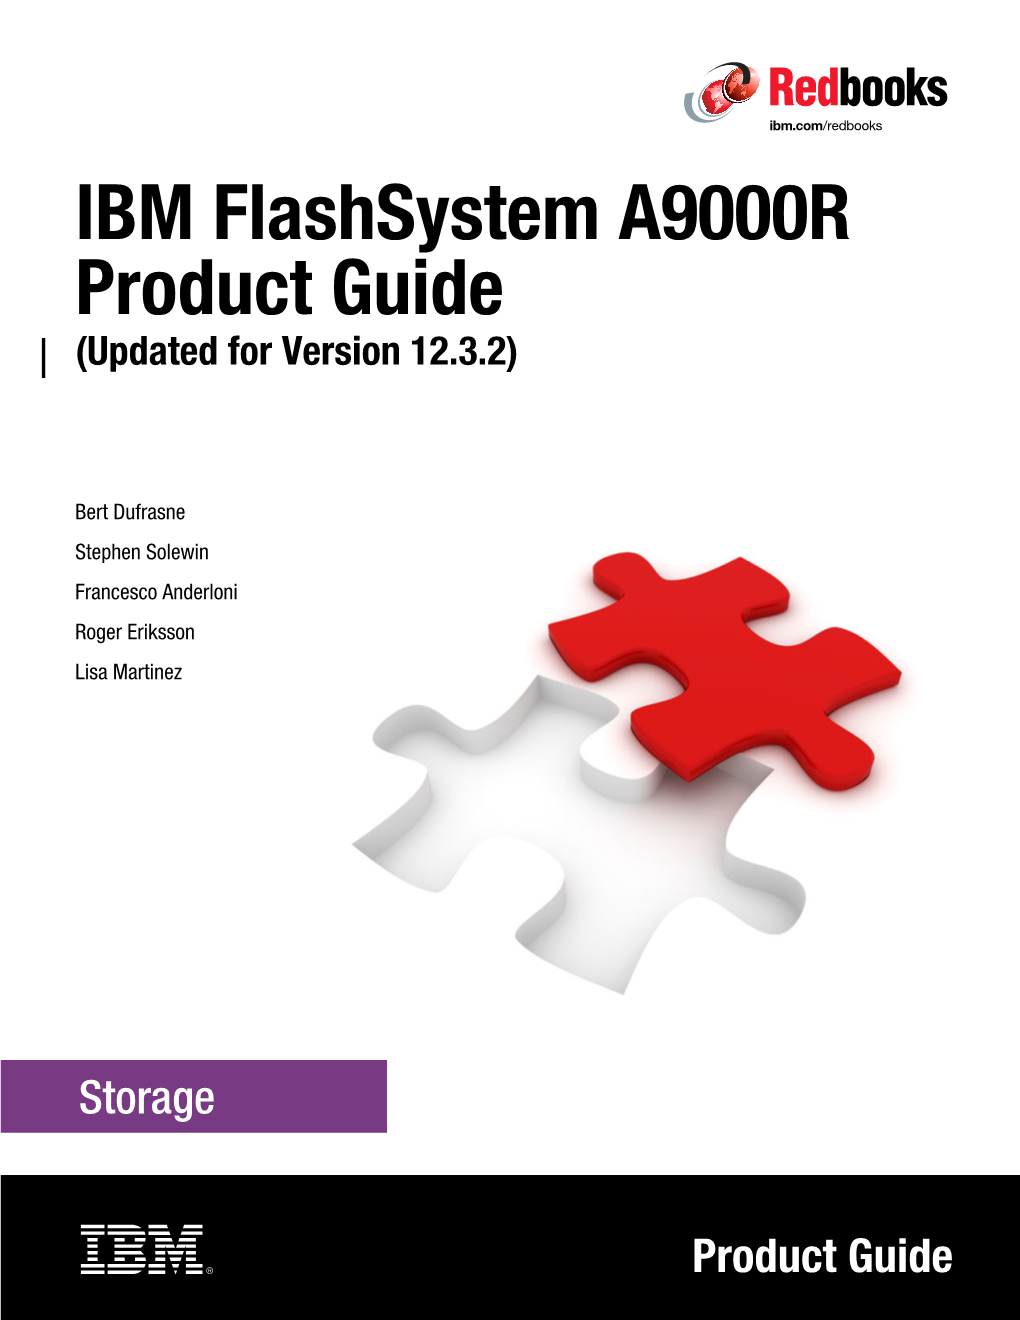 IBM Flashsystem A9000R Product Guide (Updated for Version 12.3.2)